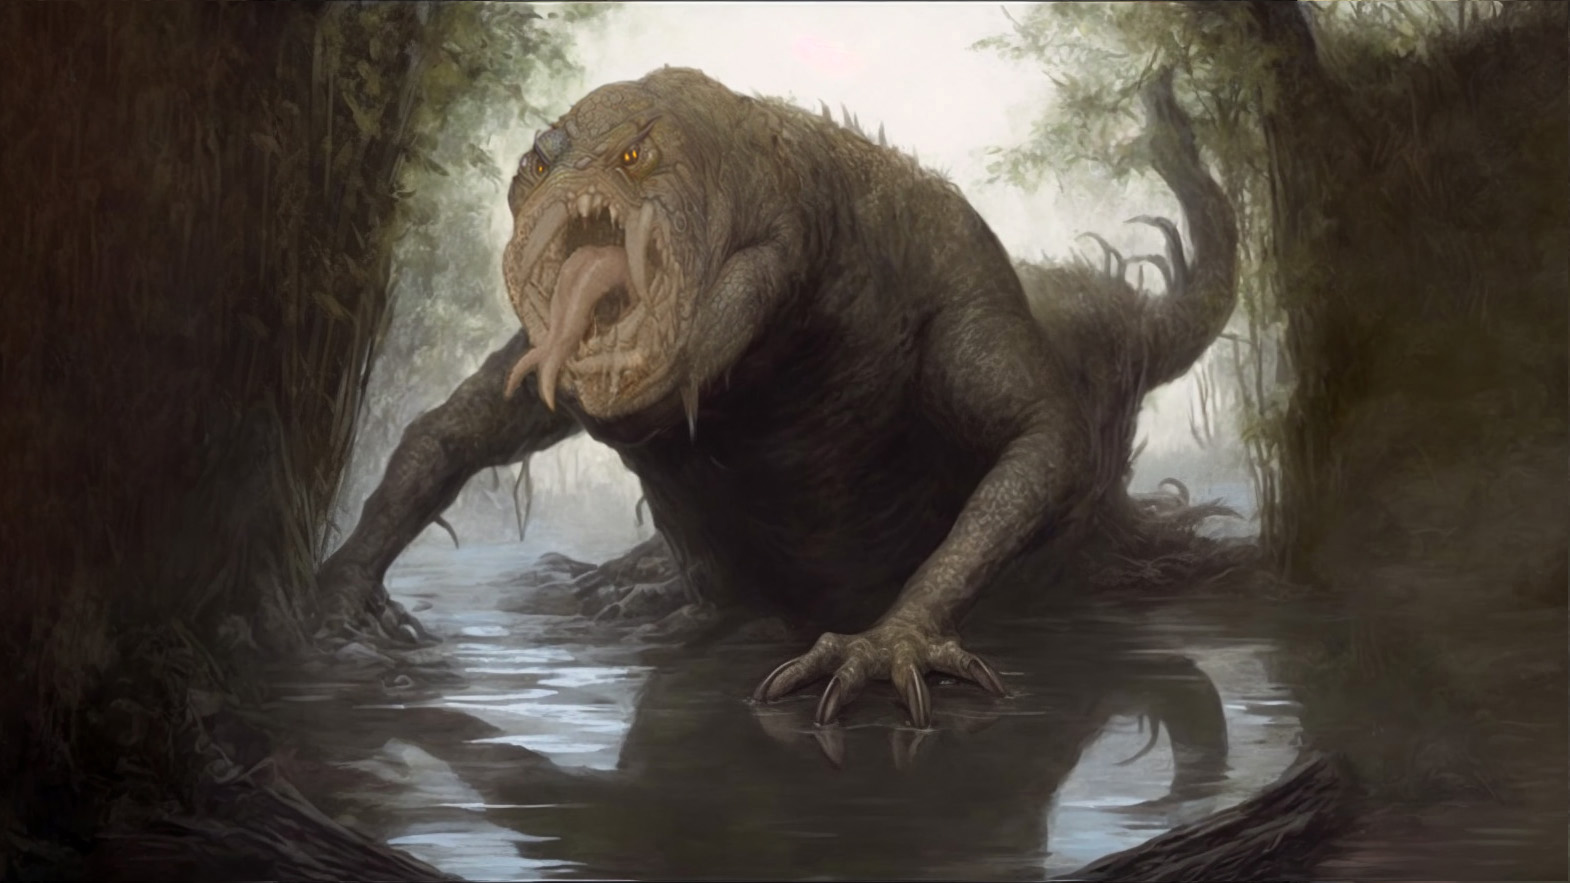 An image of a Bunyip in water